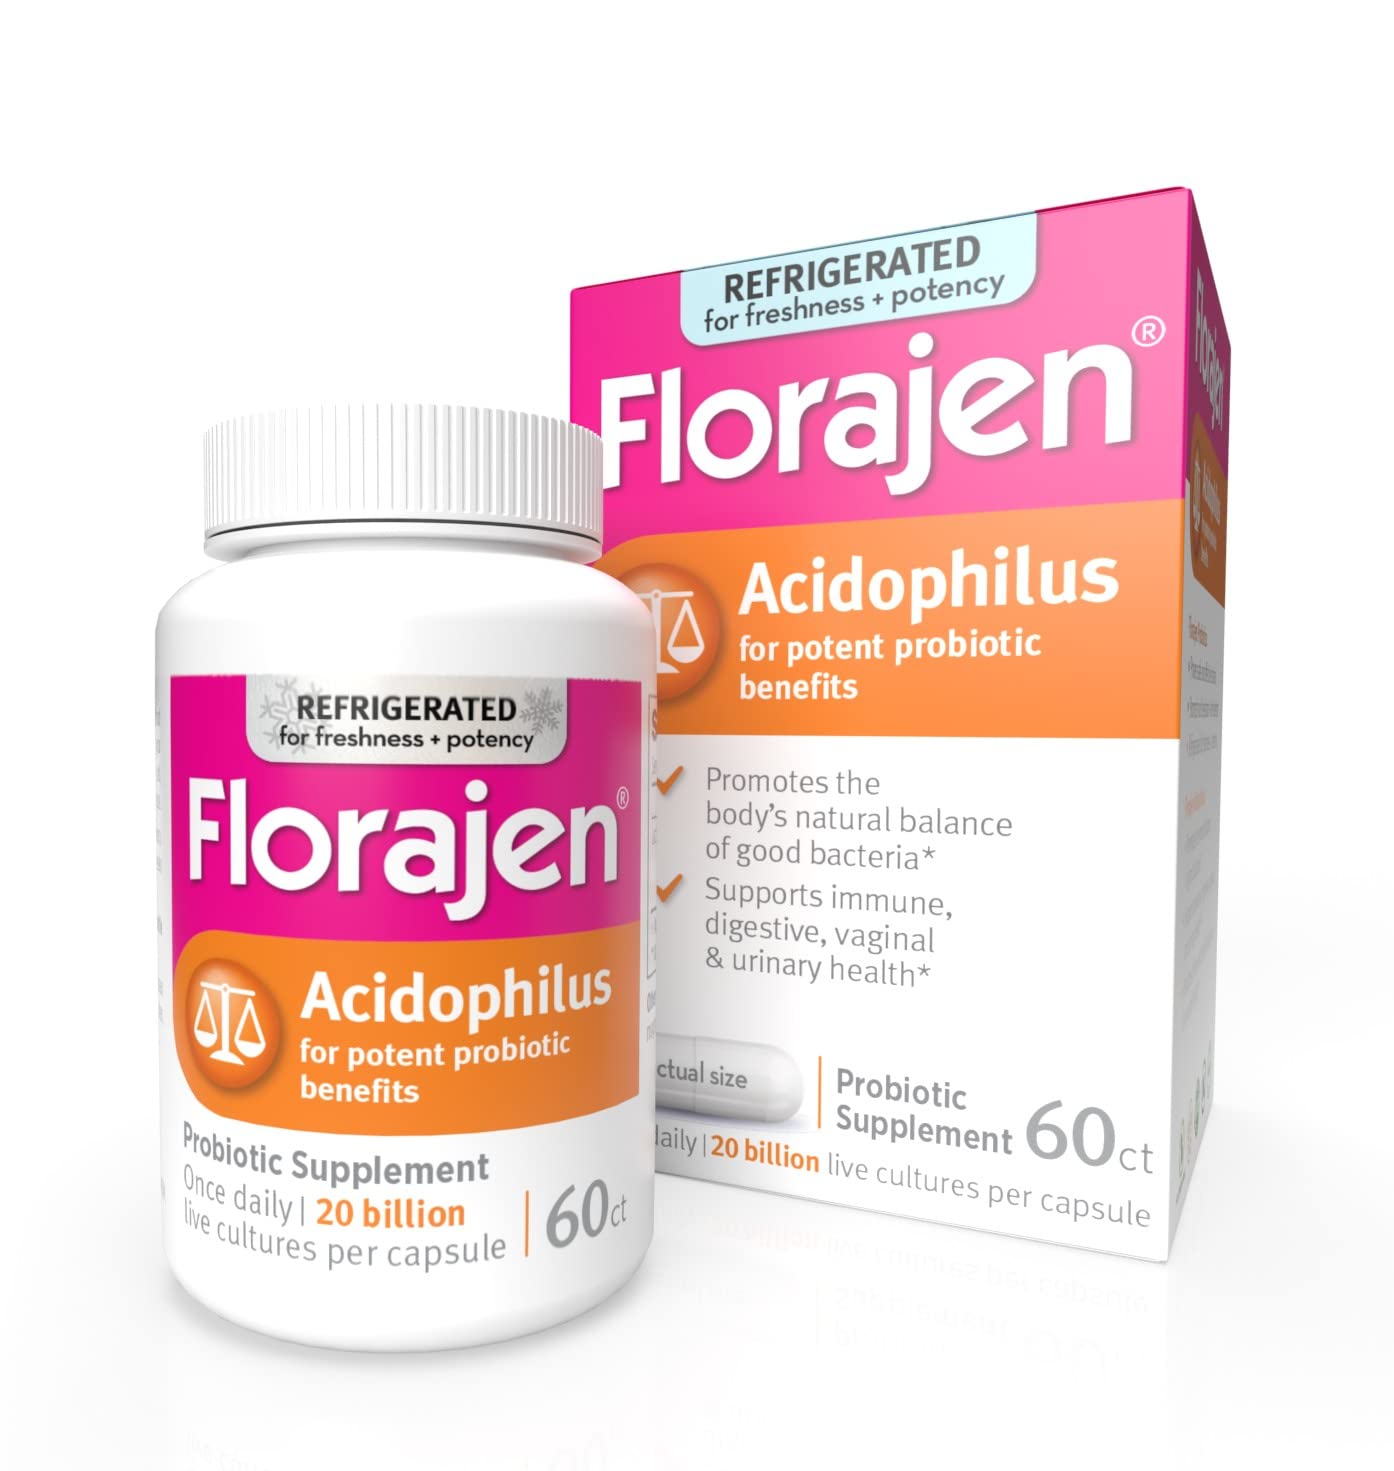 Florajen Acidophilus High Potency Refrigerated Supports Overall Health, 20 Billion CFUs for Potent Probiotic Benefits, Unflavored, 60 Count